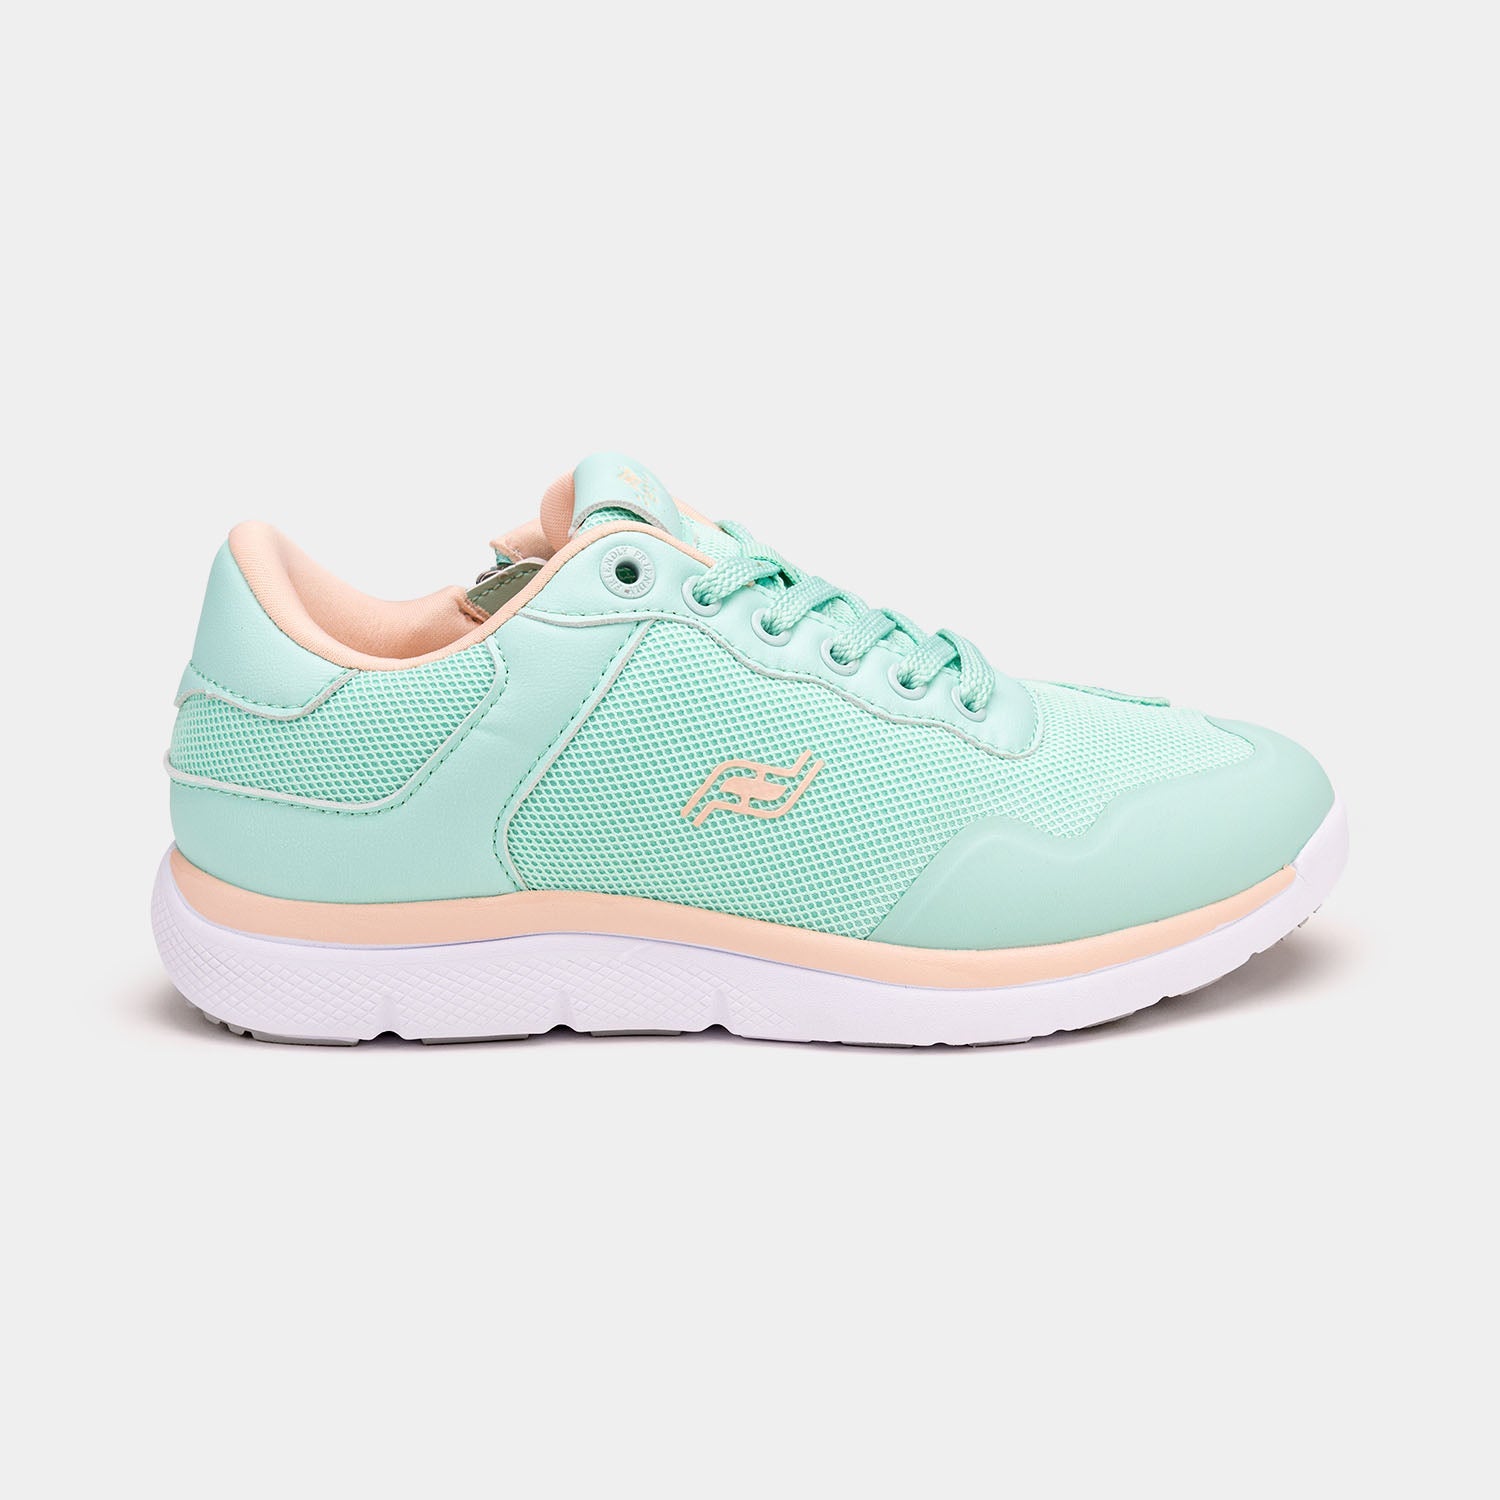 Mint women's shoe with white bottom, peach accents, and rear zipper access.